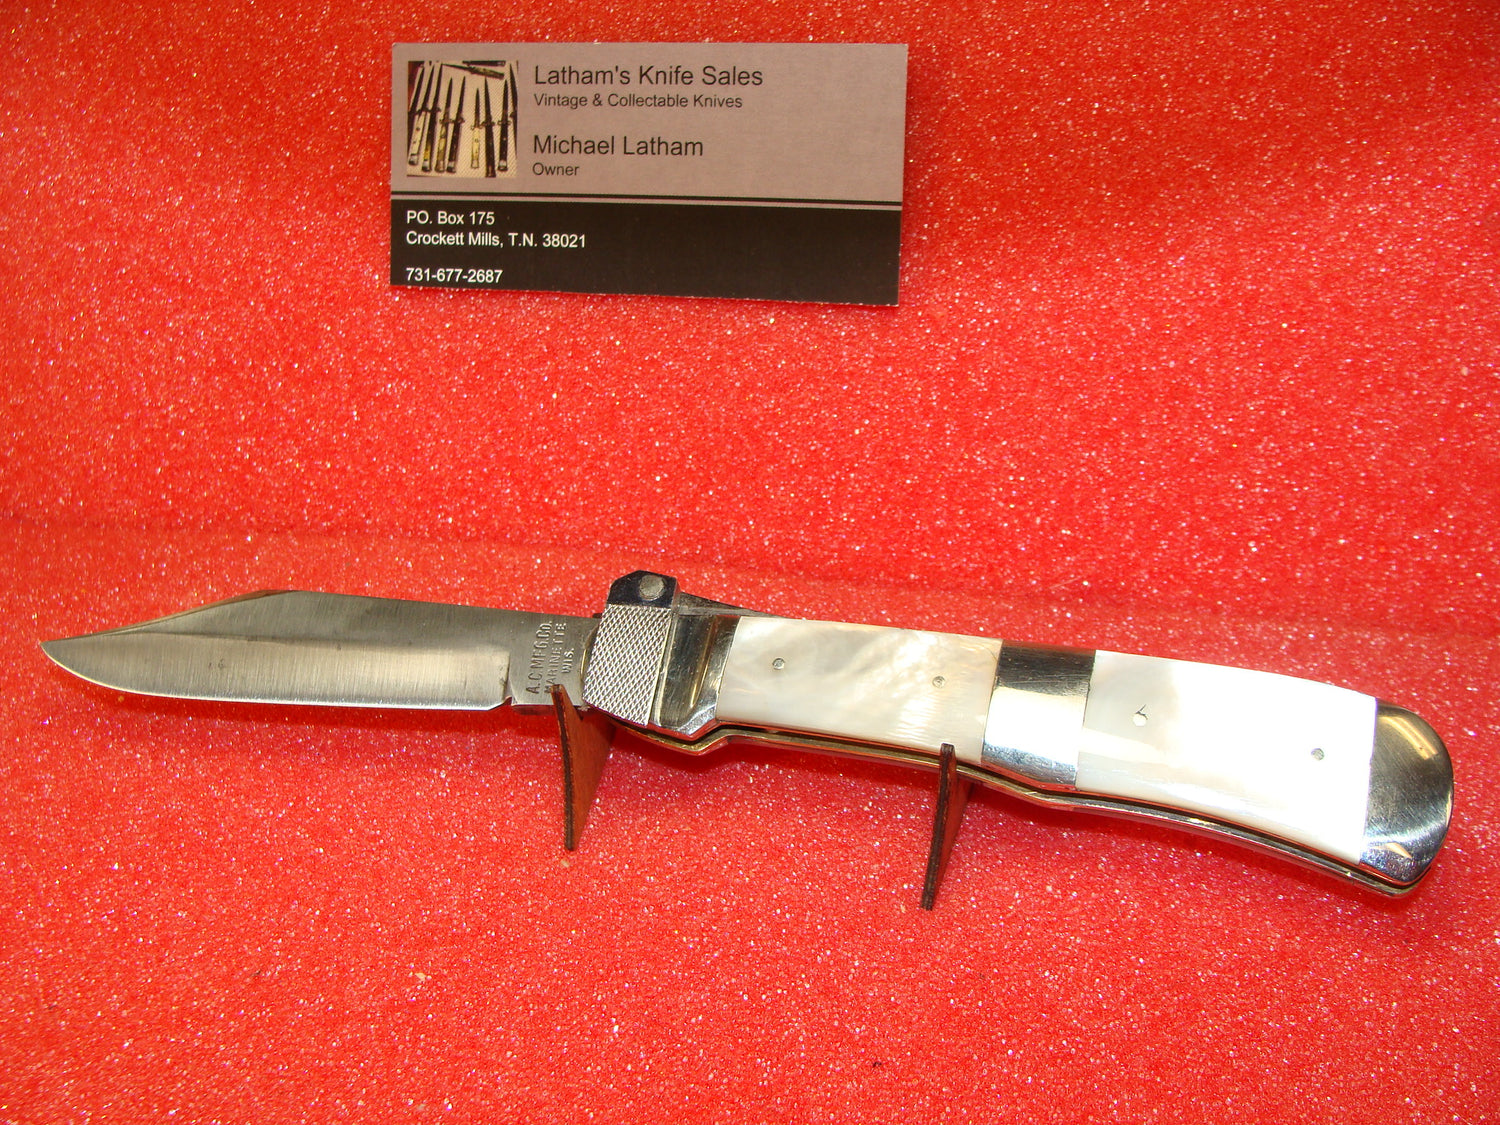 AERIAL CUTLERY CO. MARINETTE WIS. AMERICAN VINTAGE AUTOMATIC KNIFE